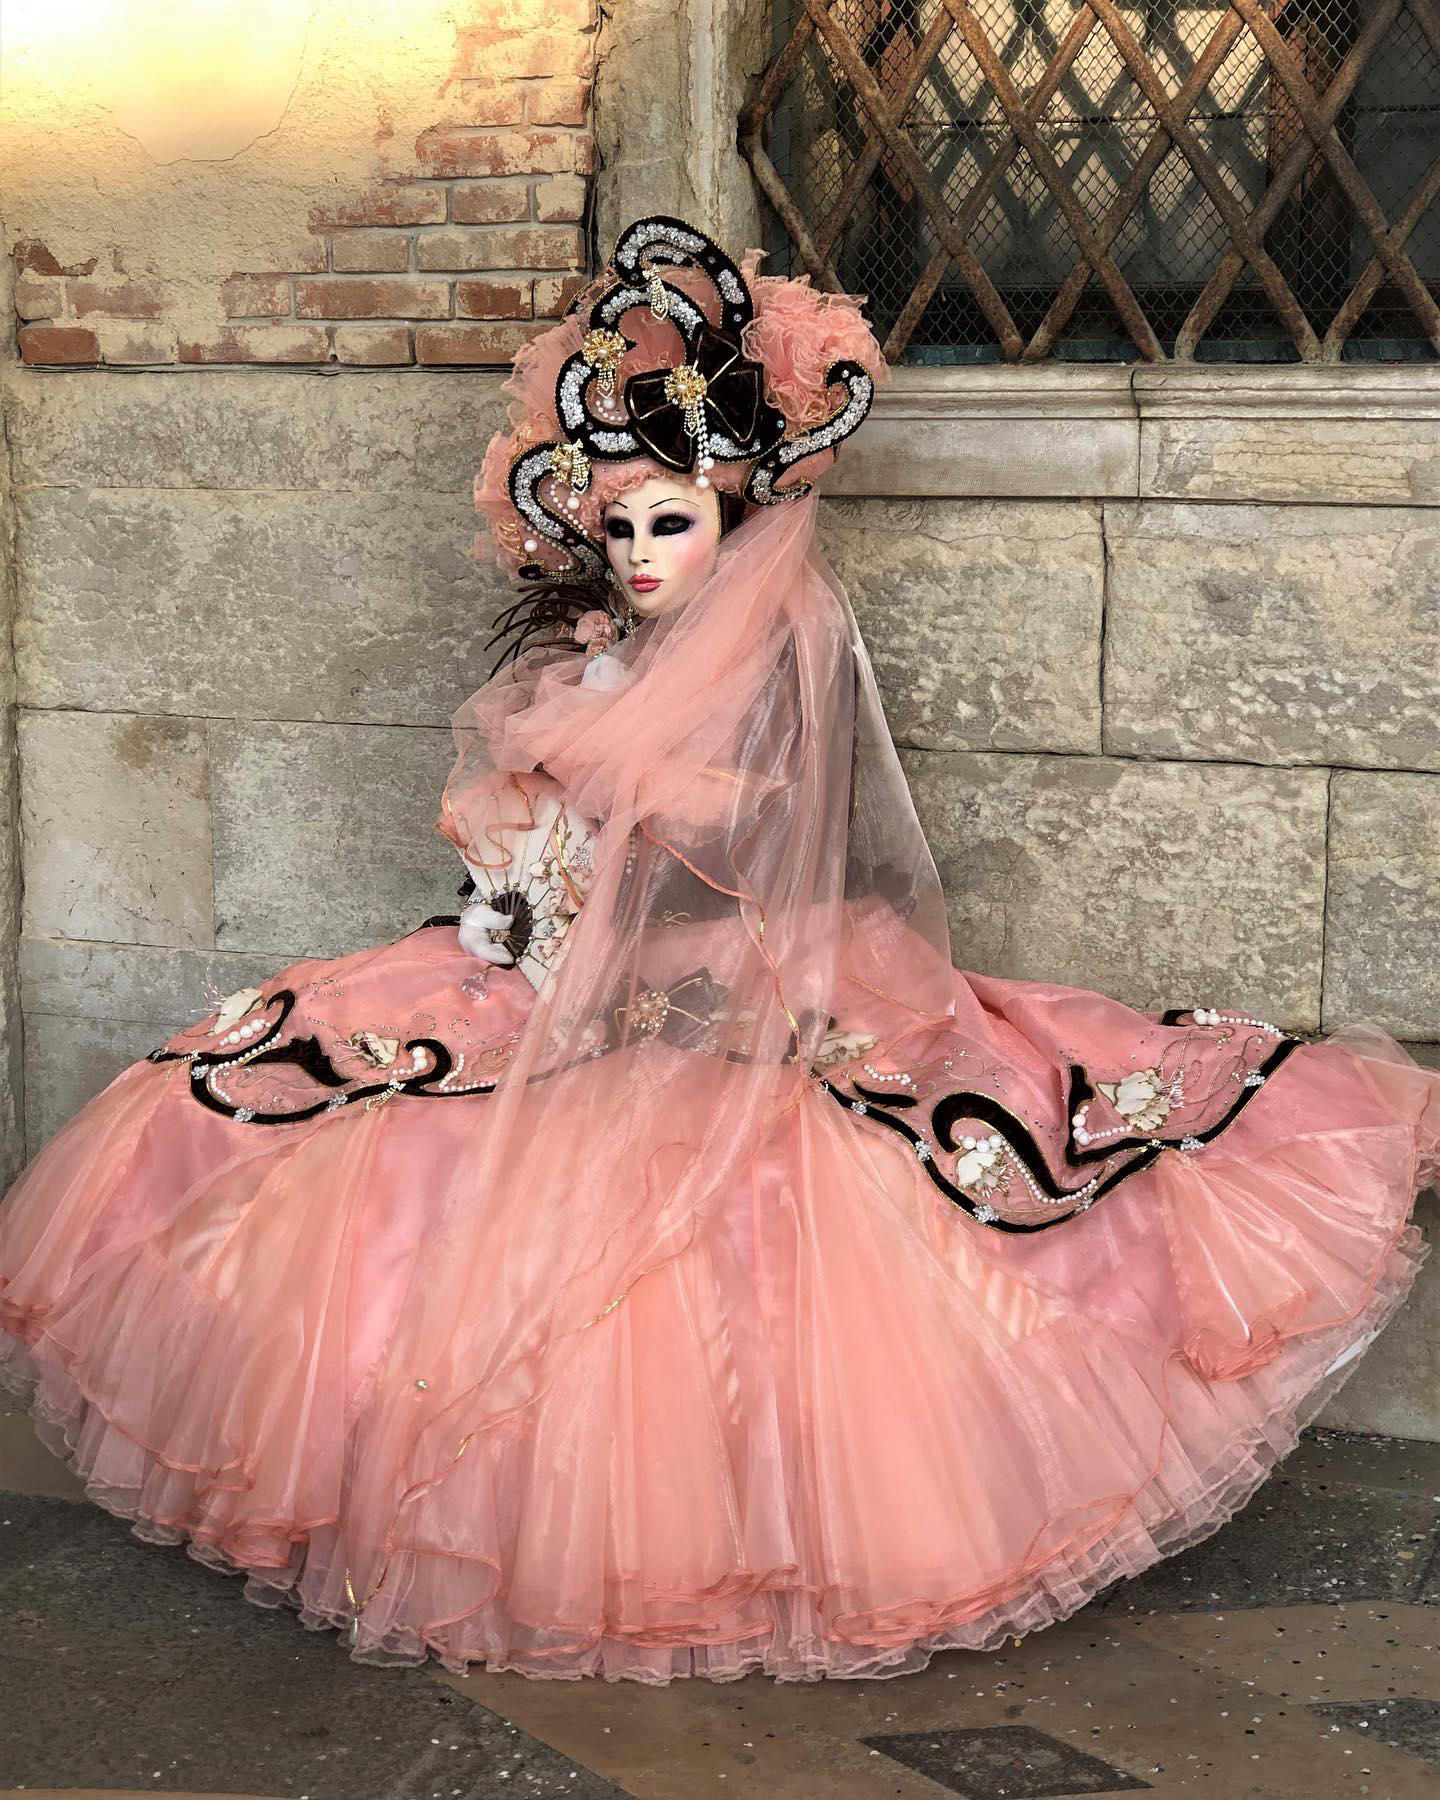 Celebrate the Venice Carnival with us